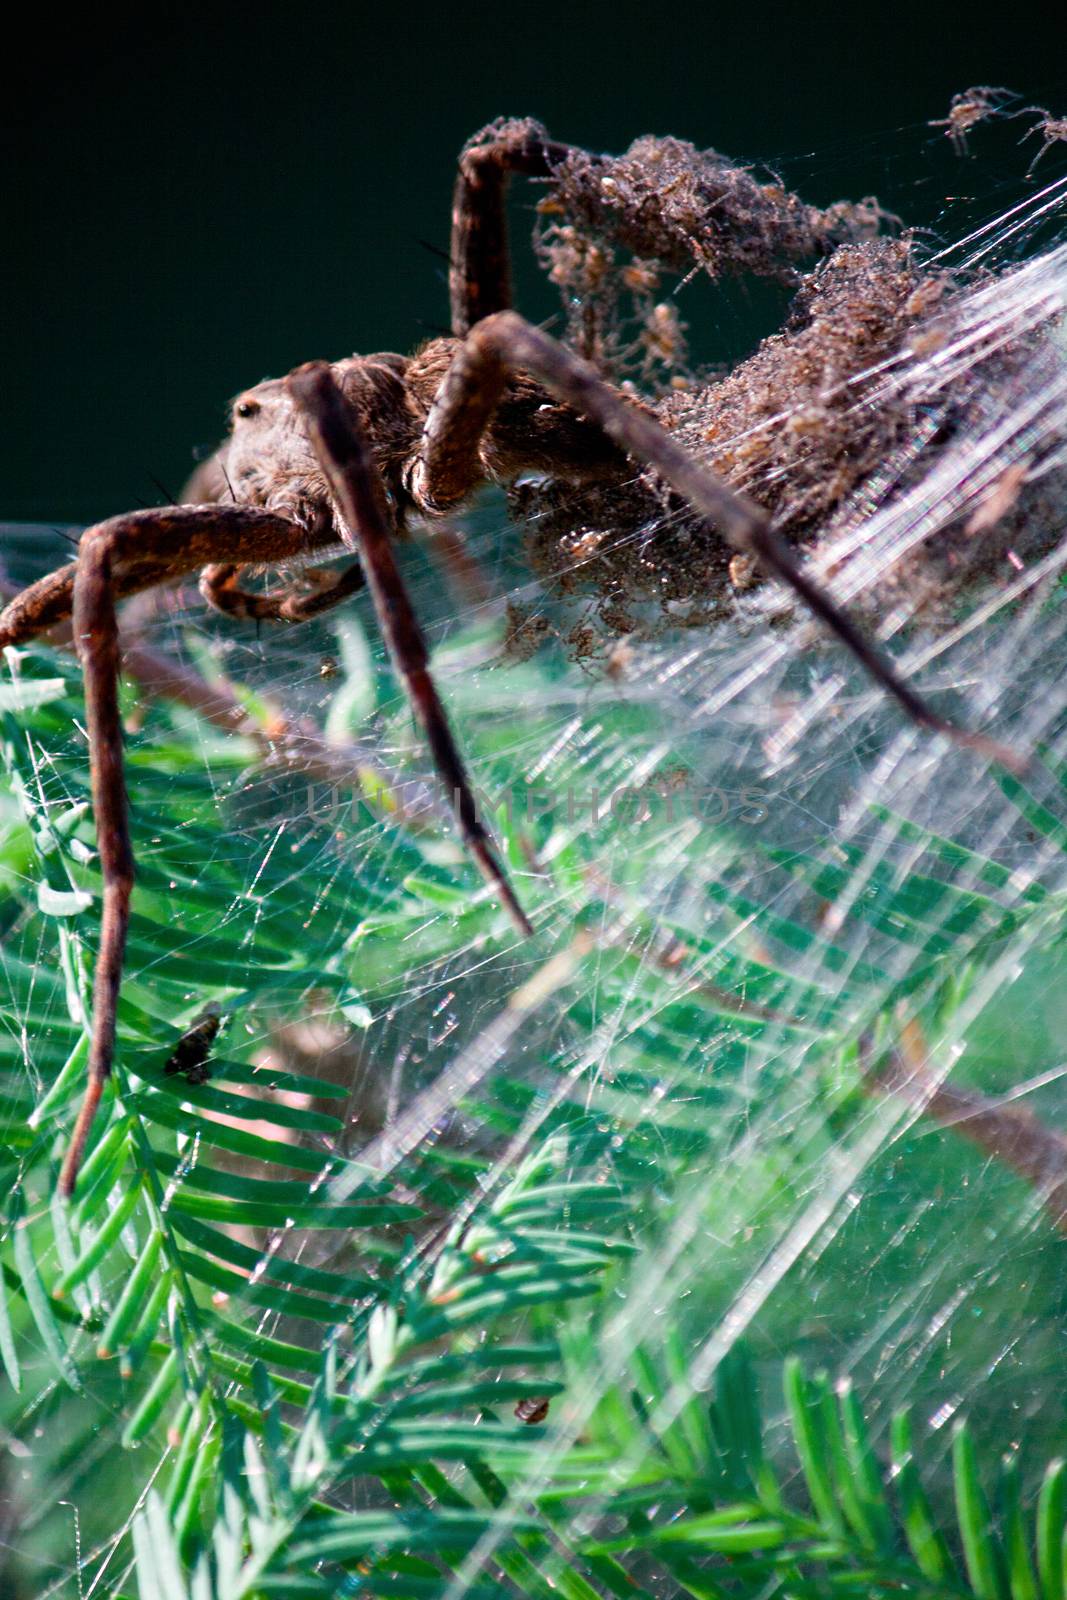 Large Fishing Spider with Baby Spiders in Web by NikkiGensert